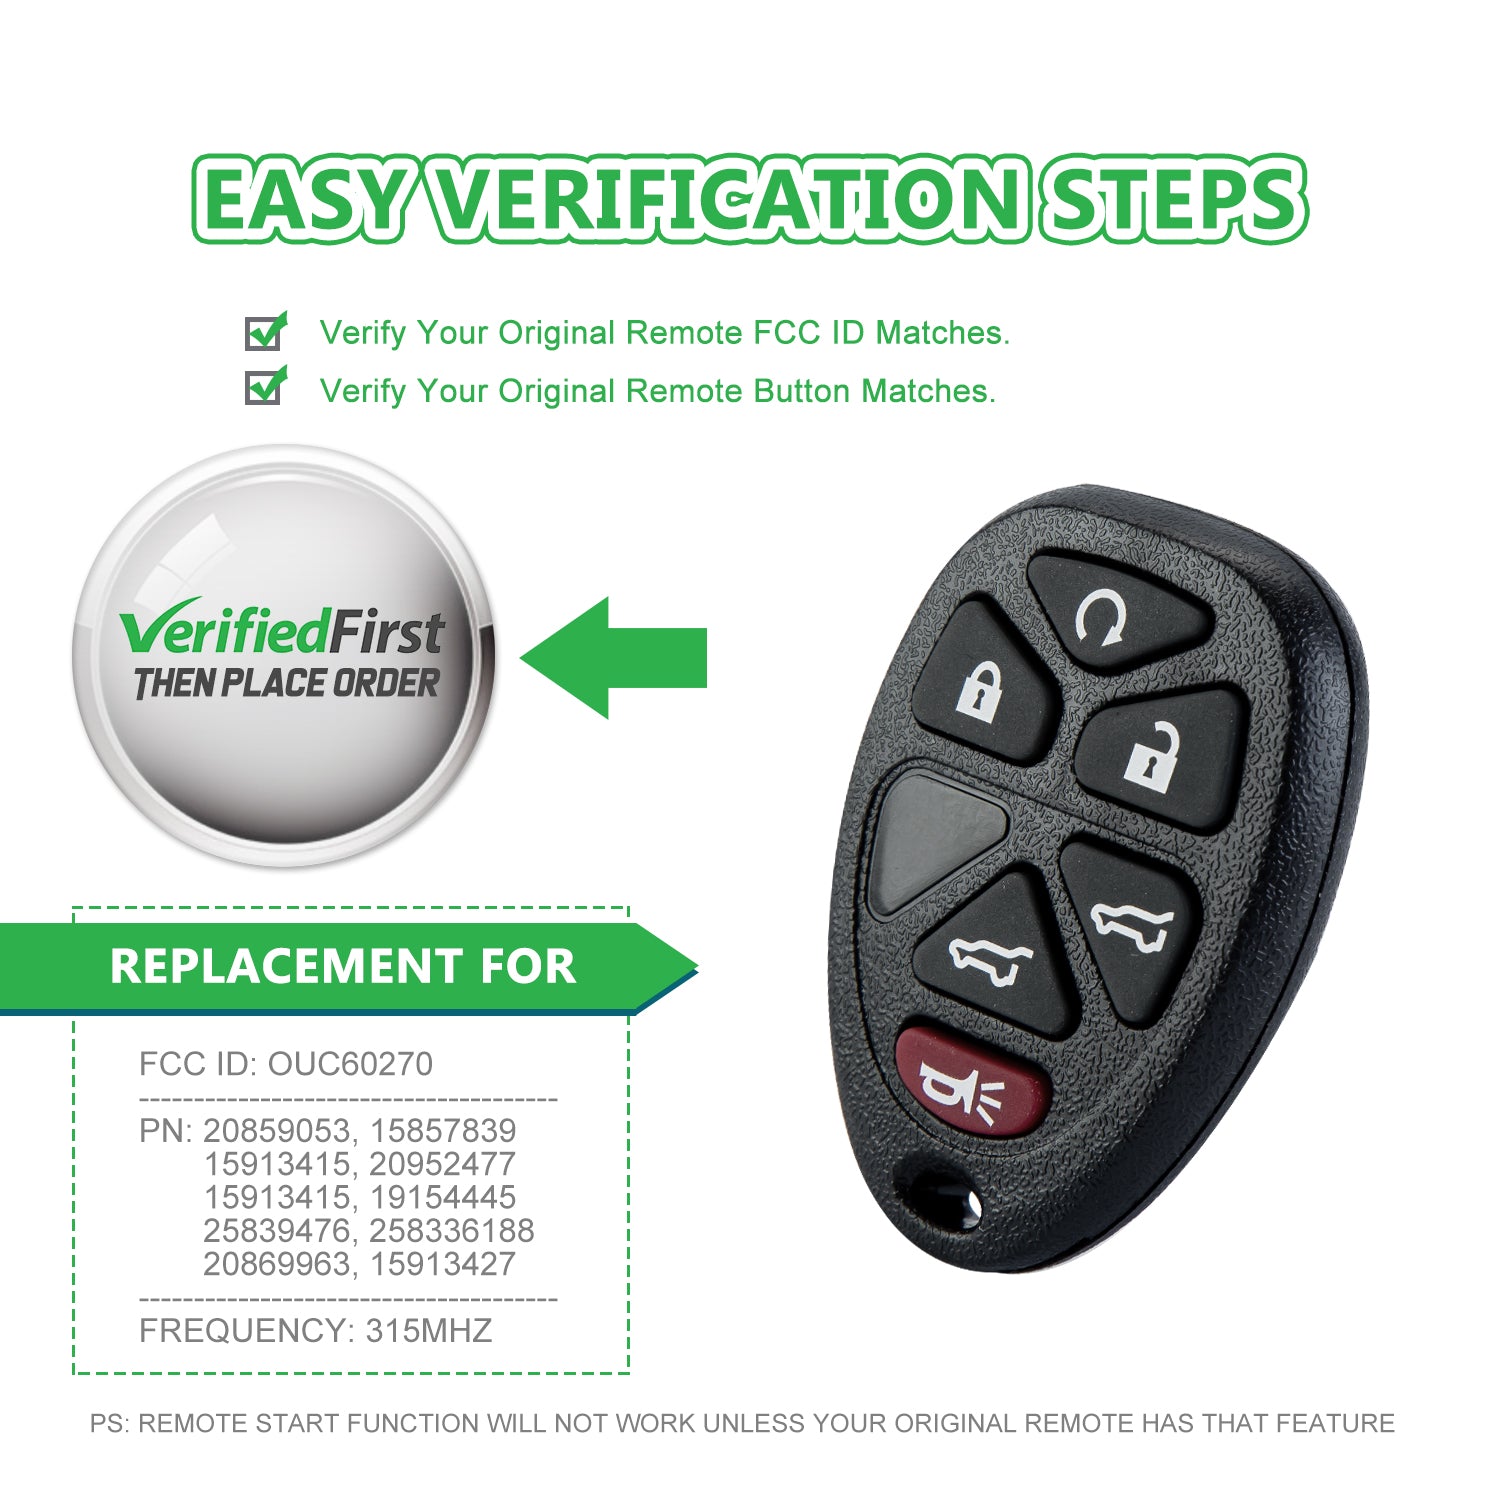 Lots of 10 Car Remote Fob Replacement for OUC60270 15913427 fits 2007 2008 2009 2010 2011 2012 2013 2014 Chevy Tahoe Suburban